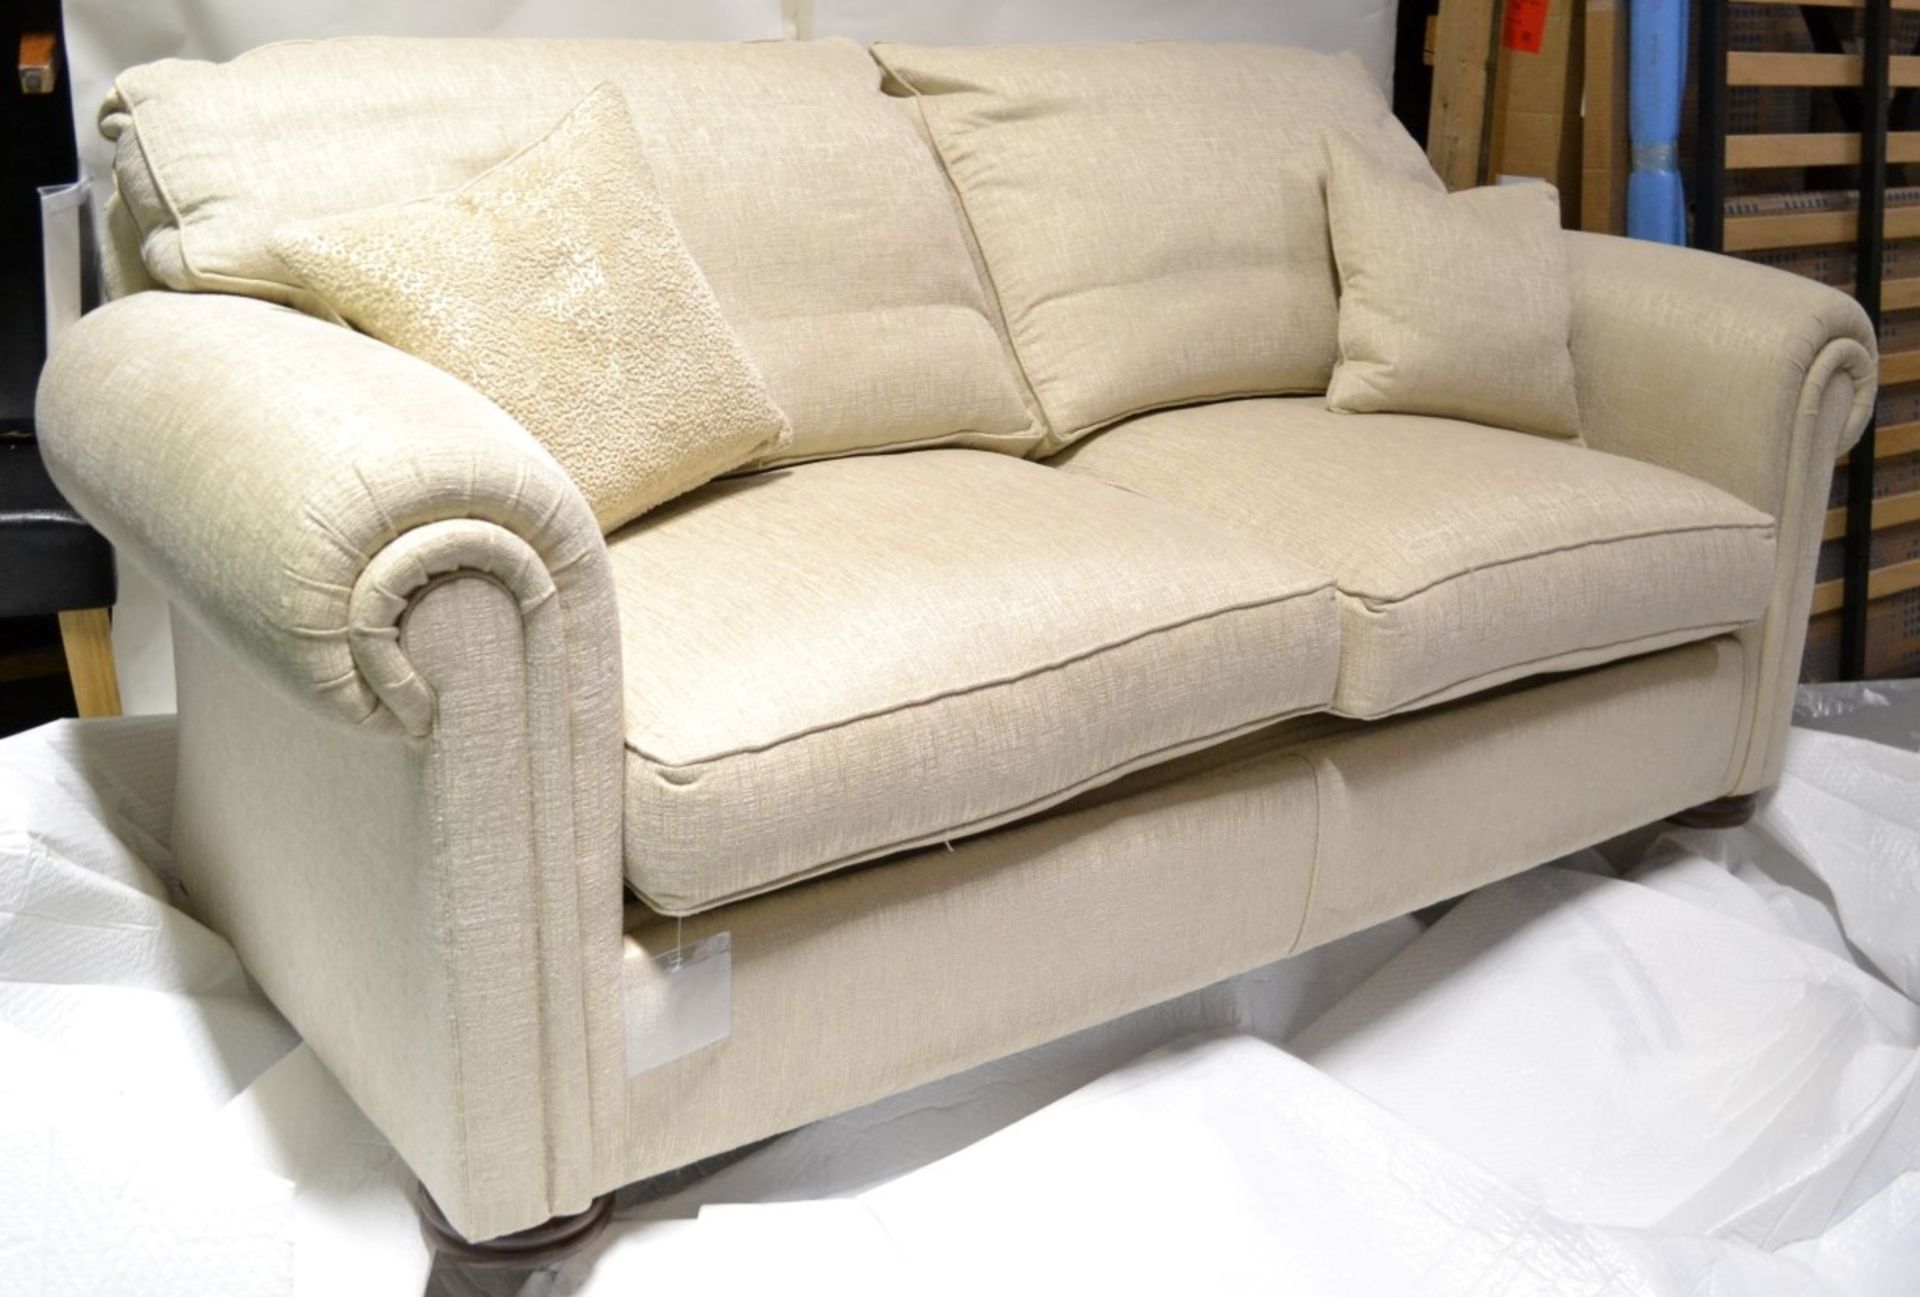 1 x DURESTA Waldorf Zephyr Sofabed With Mattress - Stunning Example In Excellent Condition - Fully - Image 9 of 14